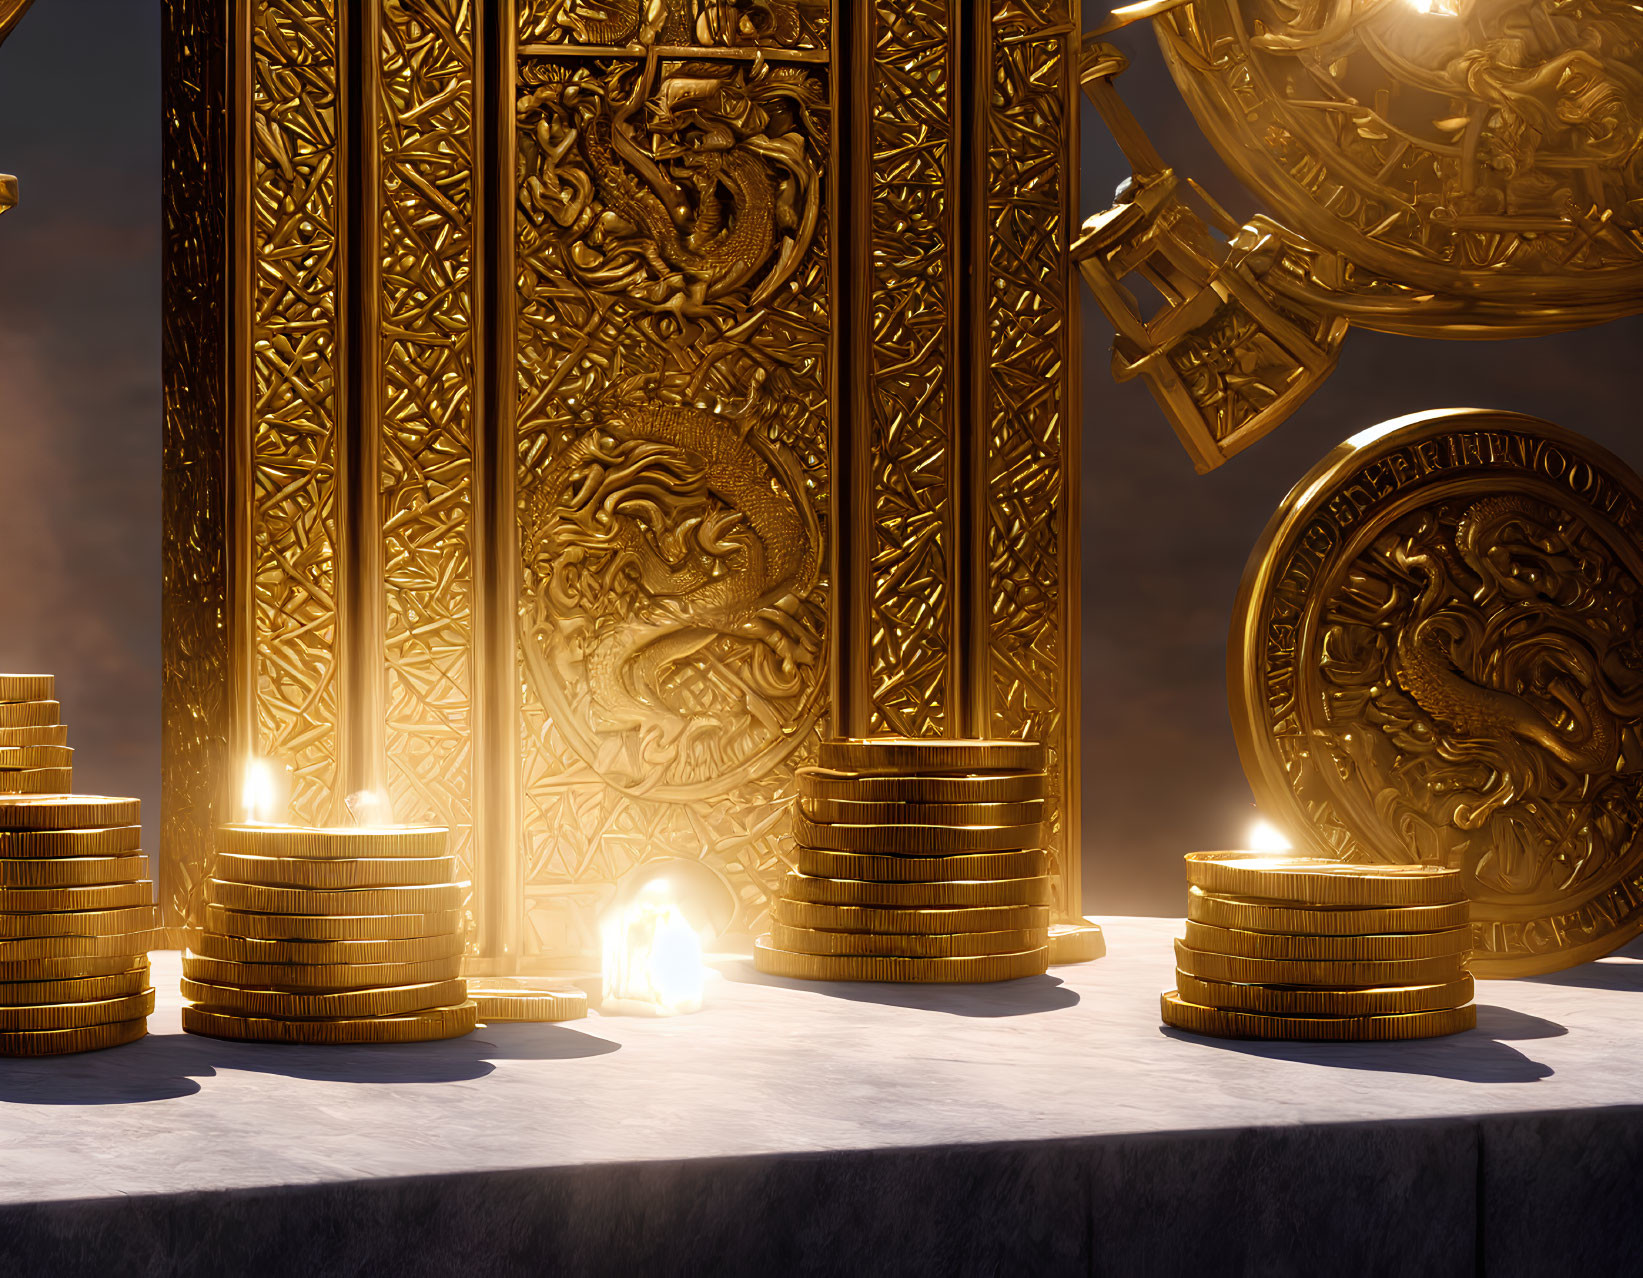 Intricate golden door surrounded by coins and orbs depicts fantasy treasure vault